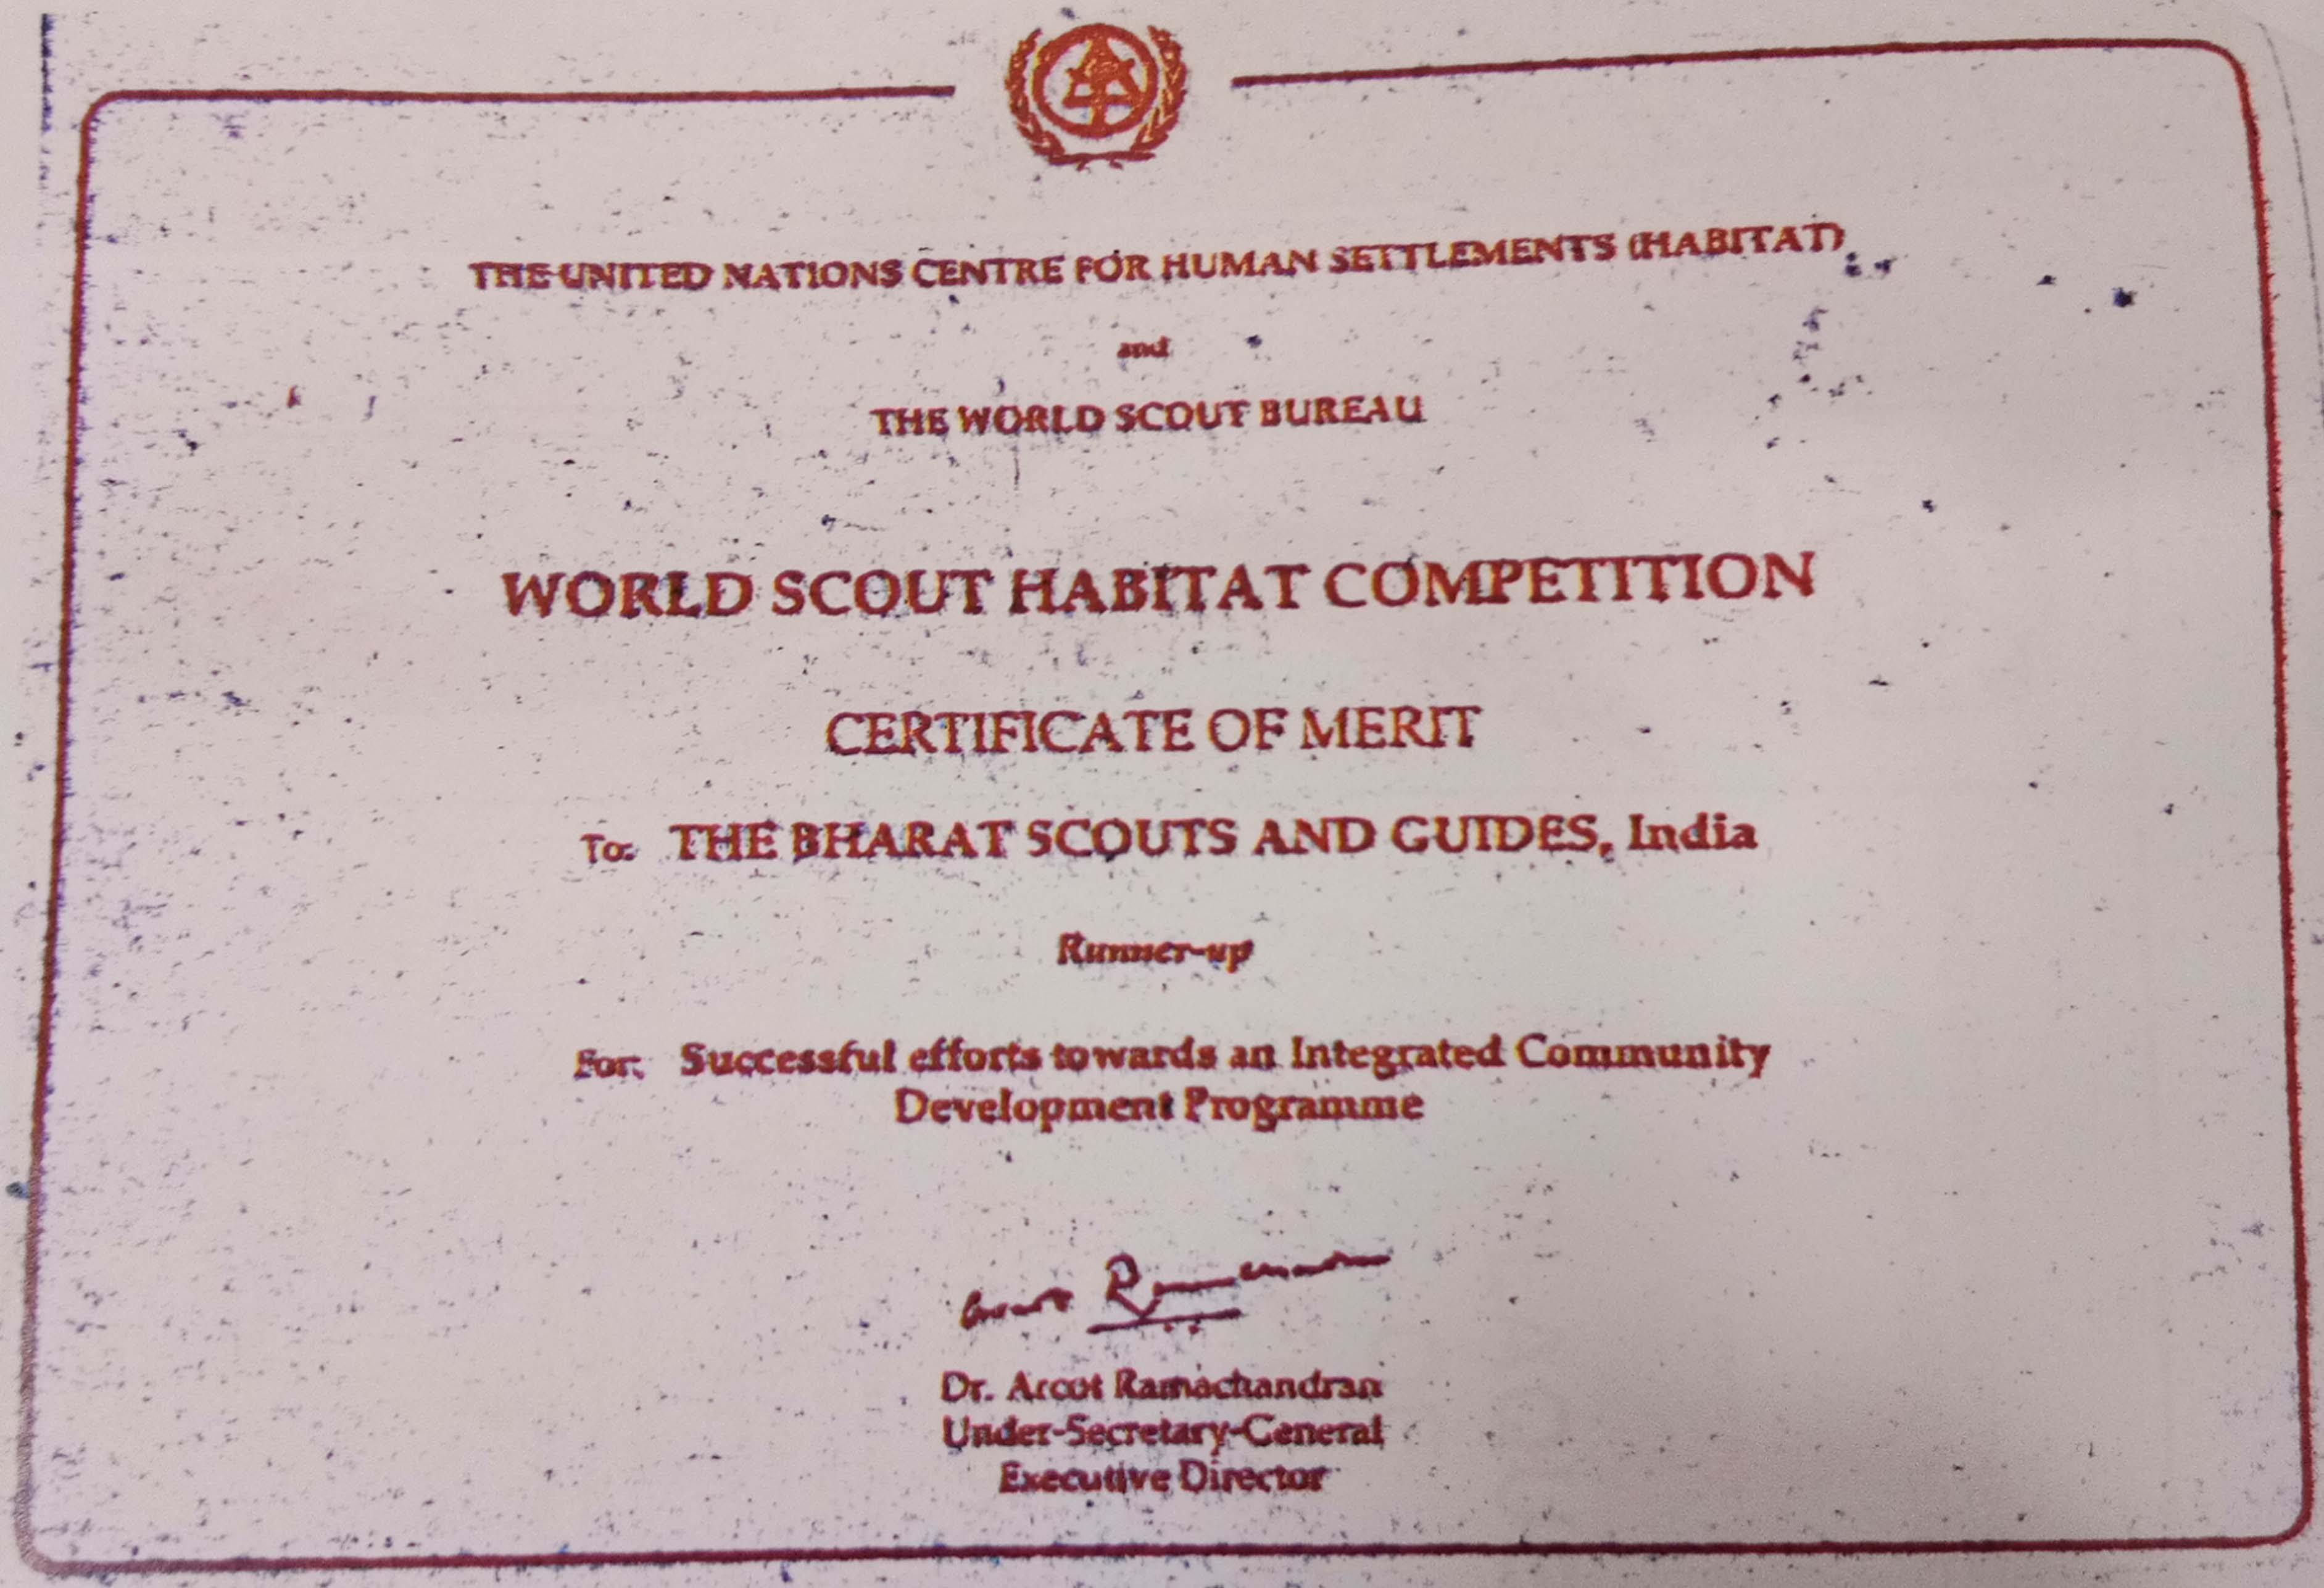 Certificate of Merit given by U.N. Centre for Human Settlement to the Bharat Scouts and Guides for successful efforts towards Integrated Community Development Program.